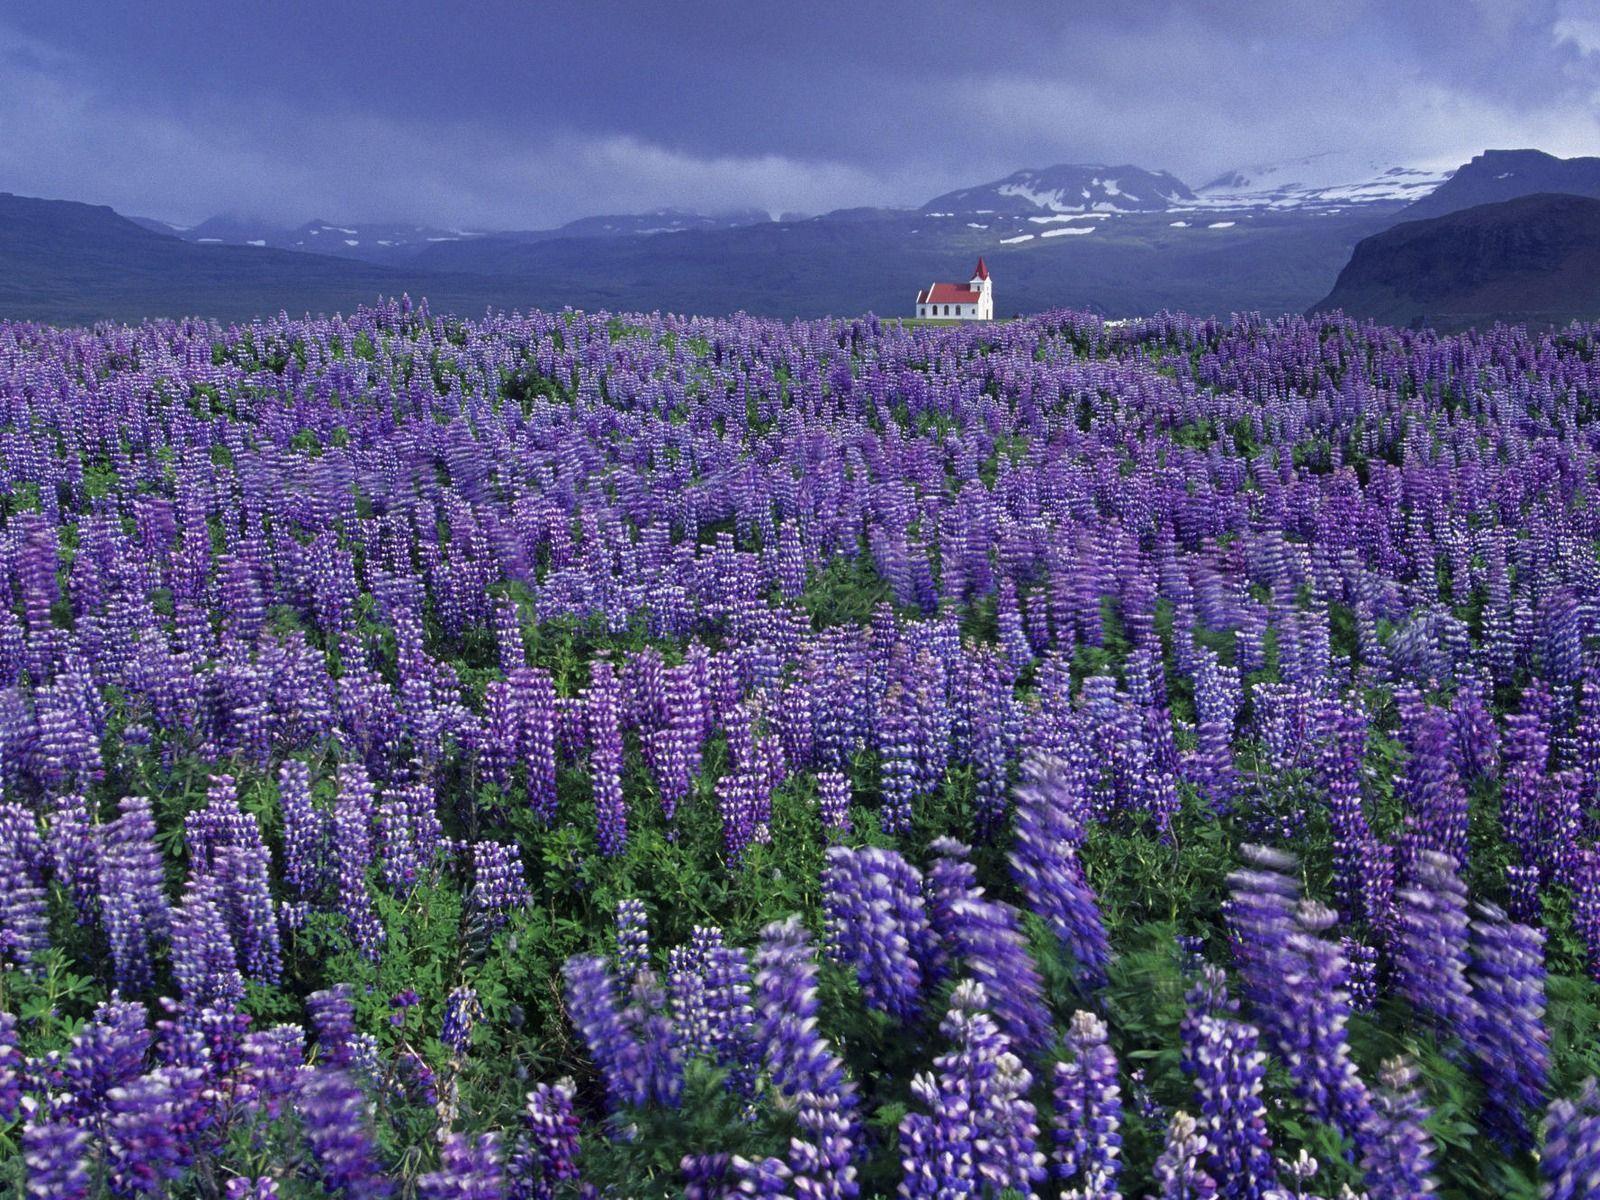 The Wild Lupine plant is a native plant that can be found growing